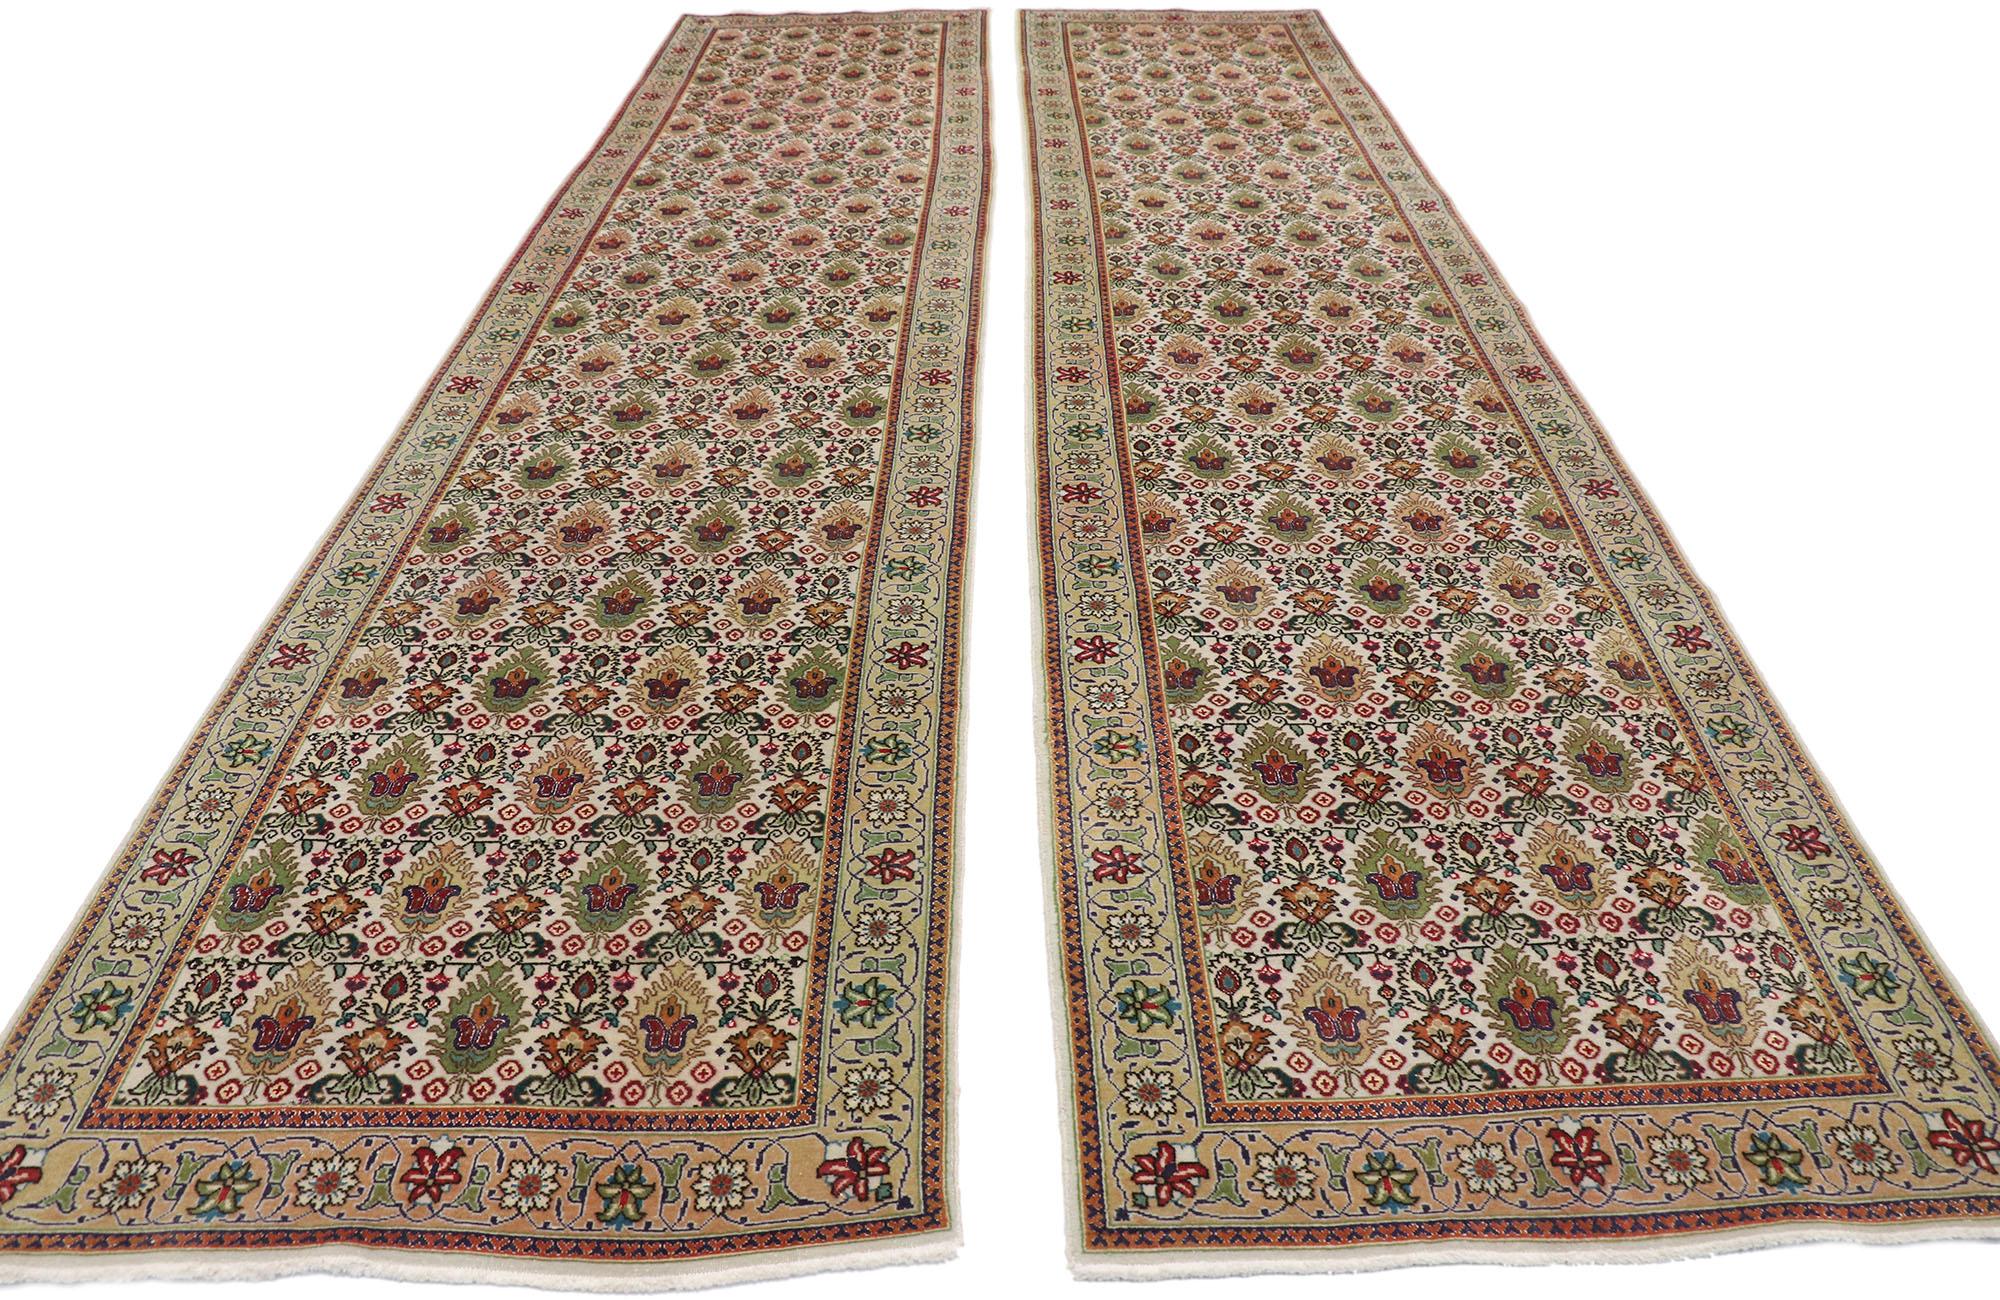 Matching Pair of Antique Persian Tabriz Runners with Arts & Crafts Style In Good Condition For Sale In Dallas, TX